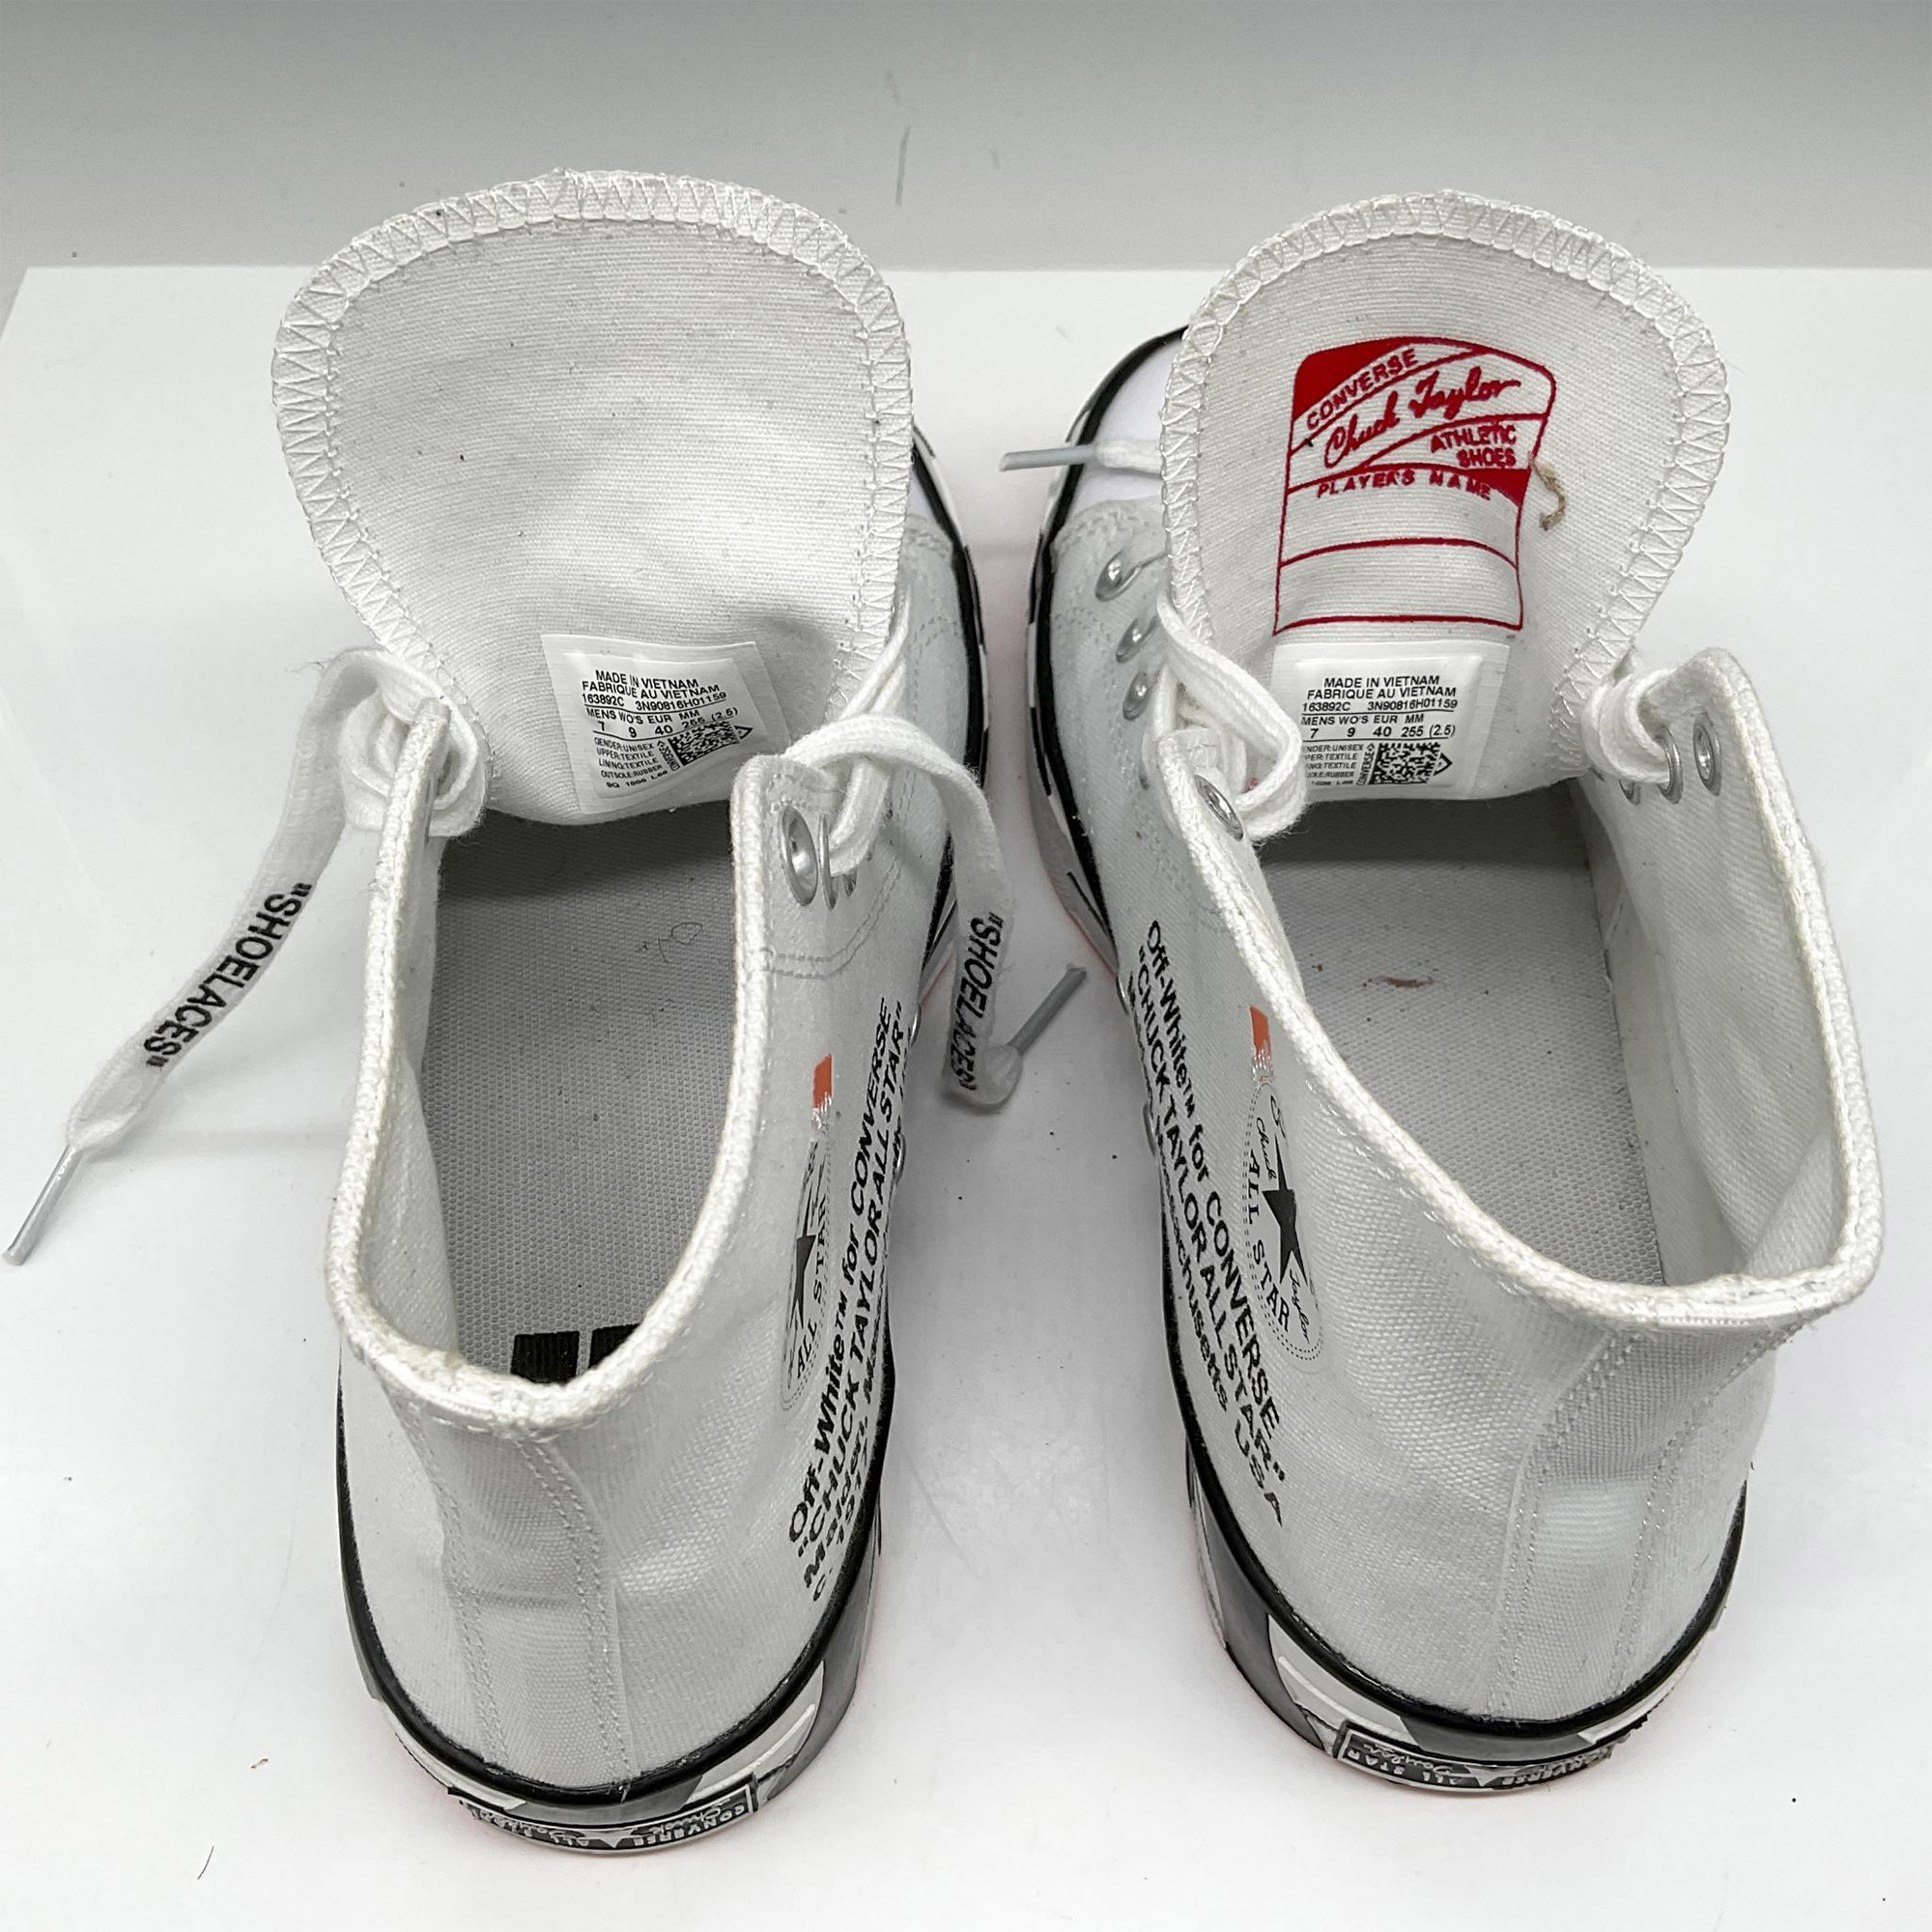 Converse Off-White Virgil Abloh Chuck 70 Sneakers - Image 6 of 6